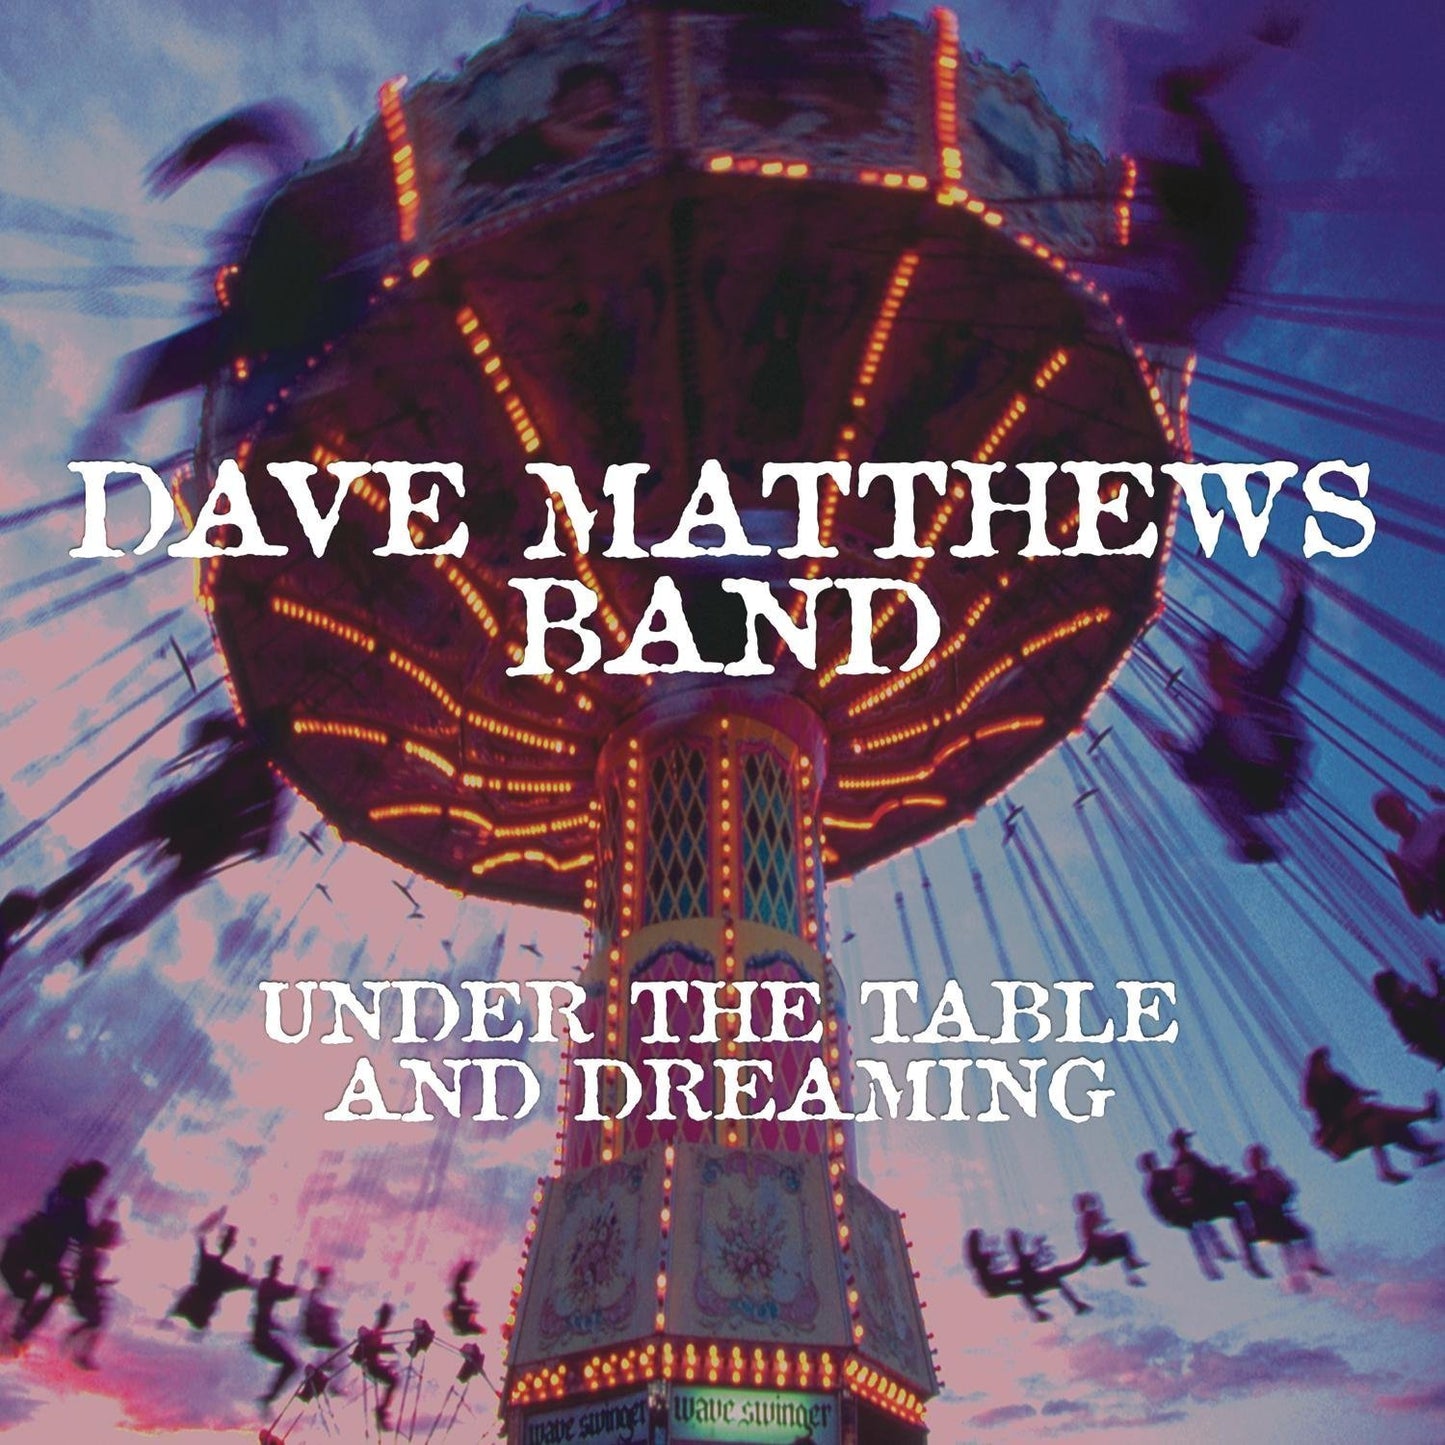 Under The Table And Dreaming - Dave Matthews Band Vinyl